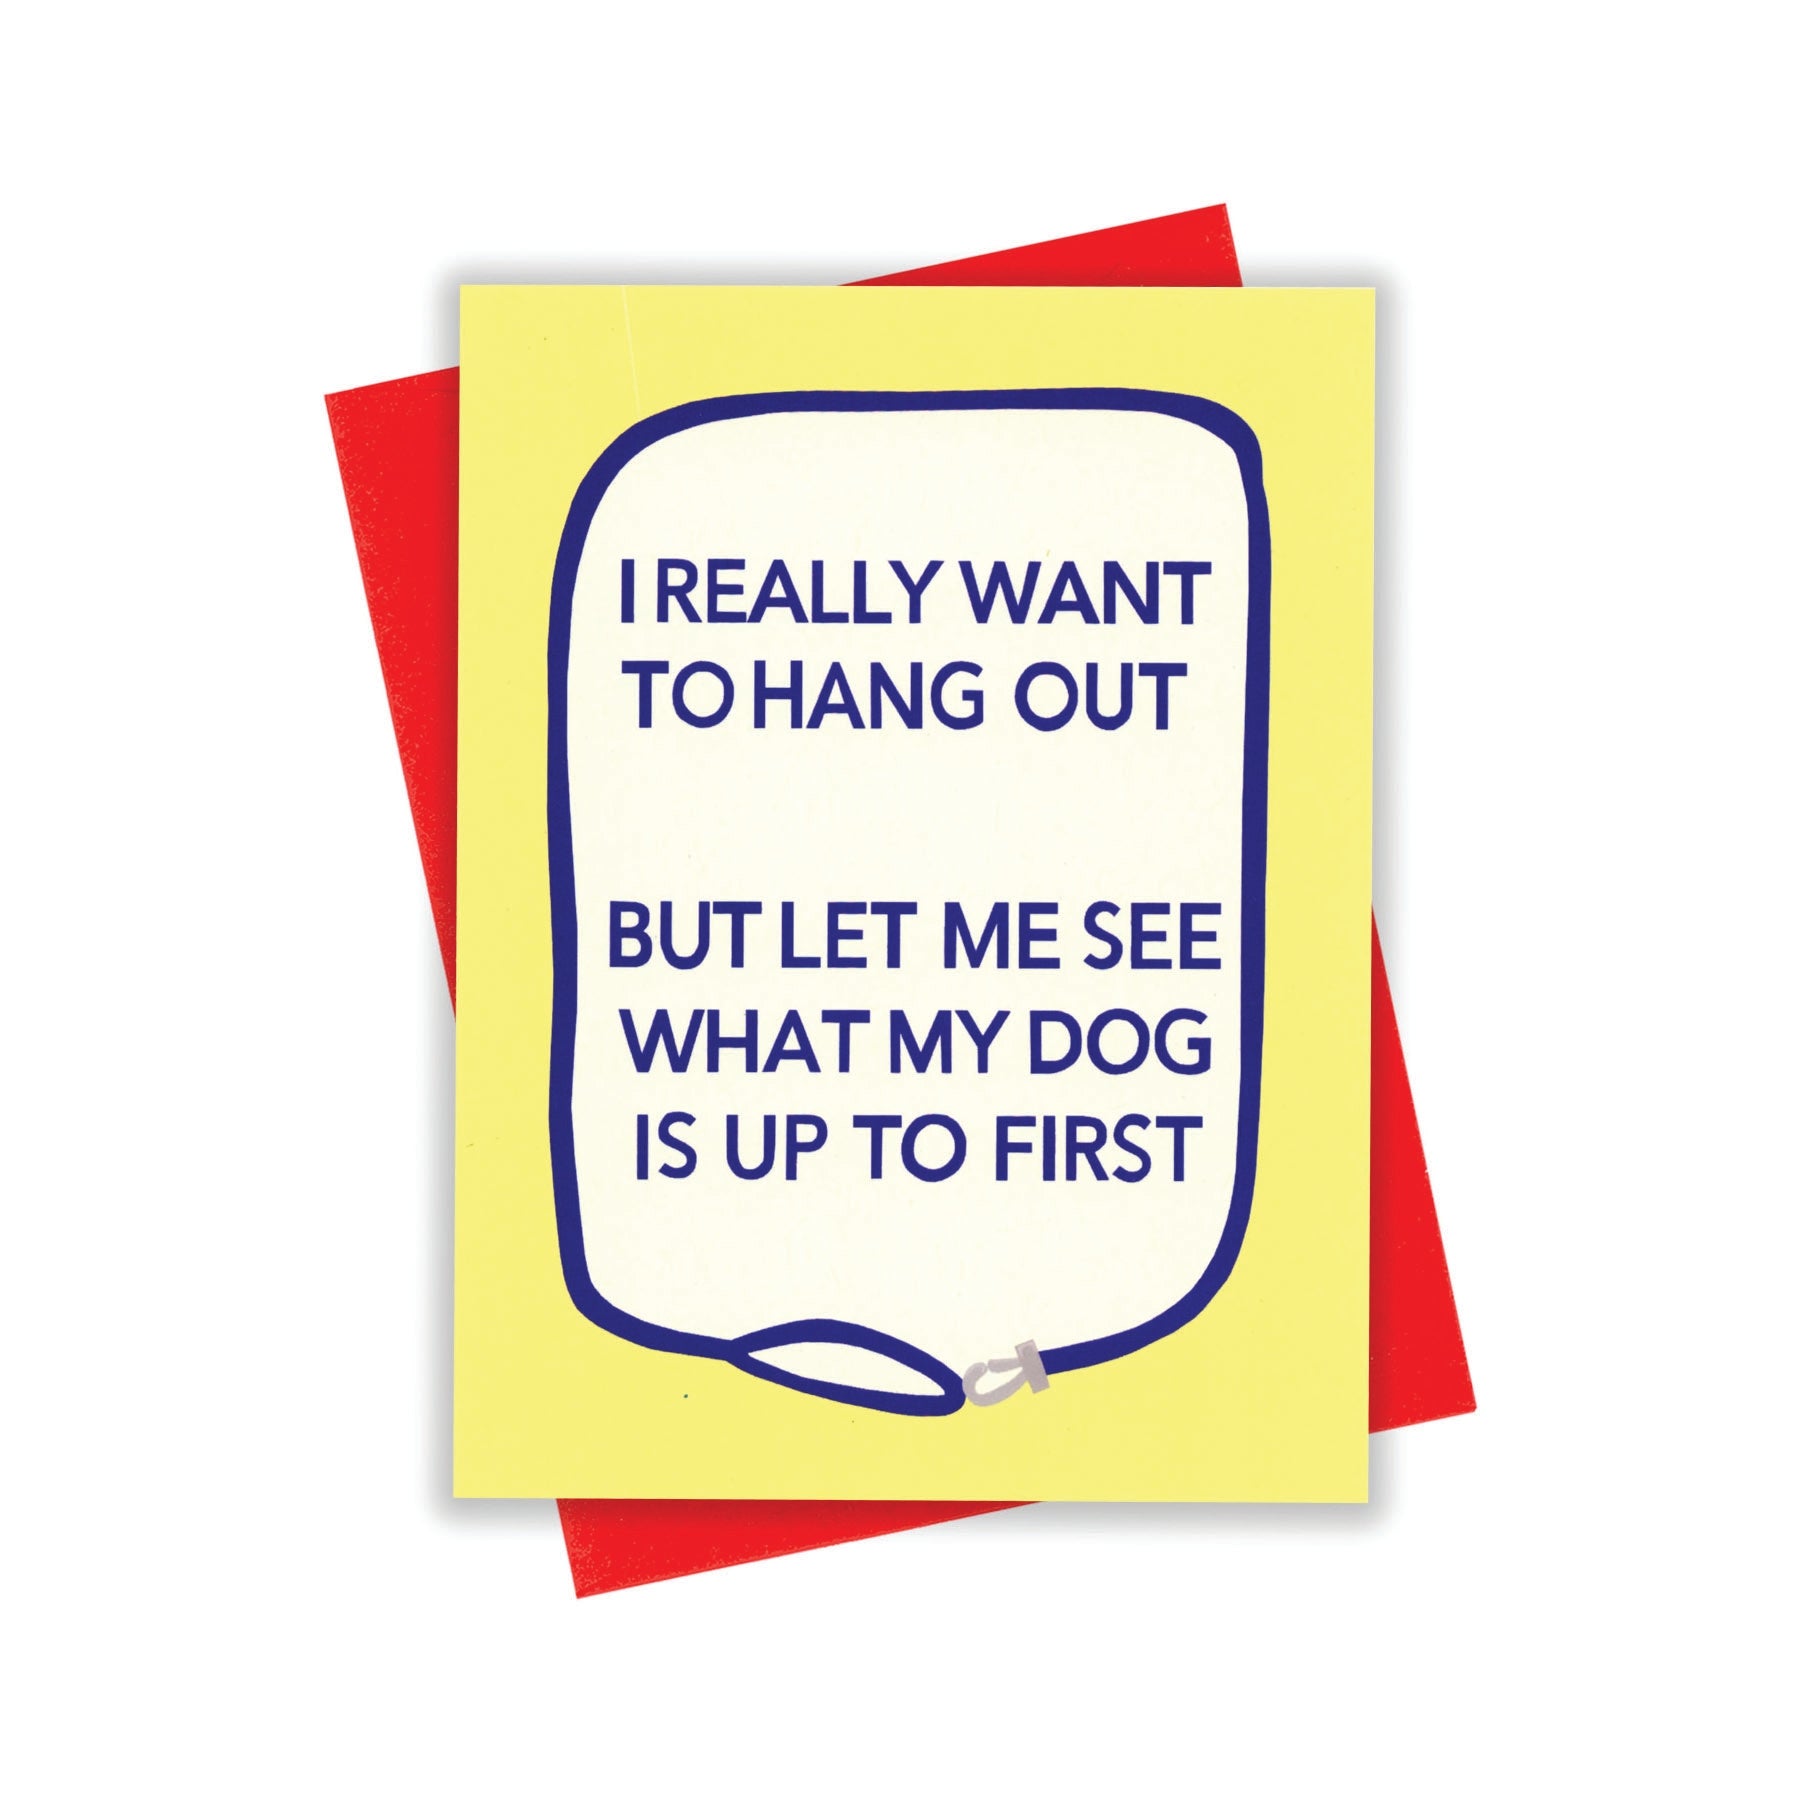 Yellow card with blue text saying, “I Really Want to Hang Out But Let Me See What My Dog Is Up To First”. Images of a blue dog leash. A red envelope is included.